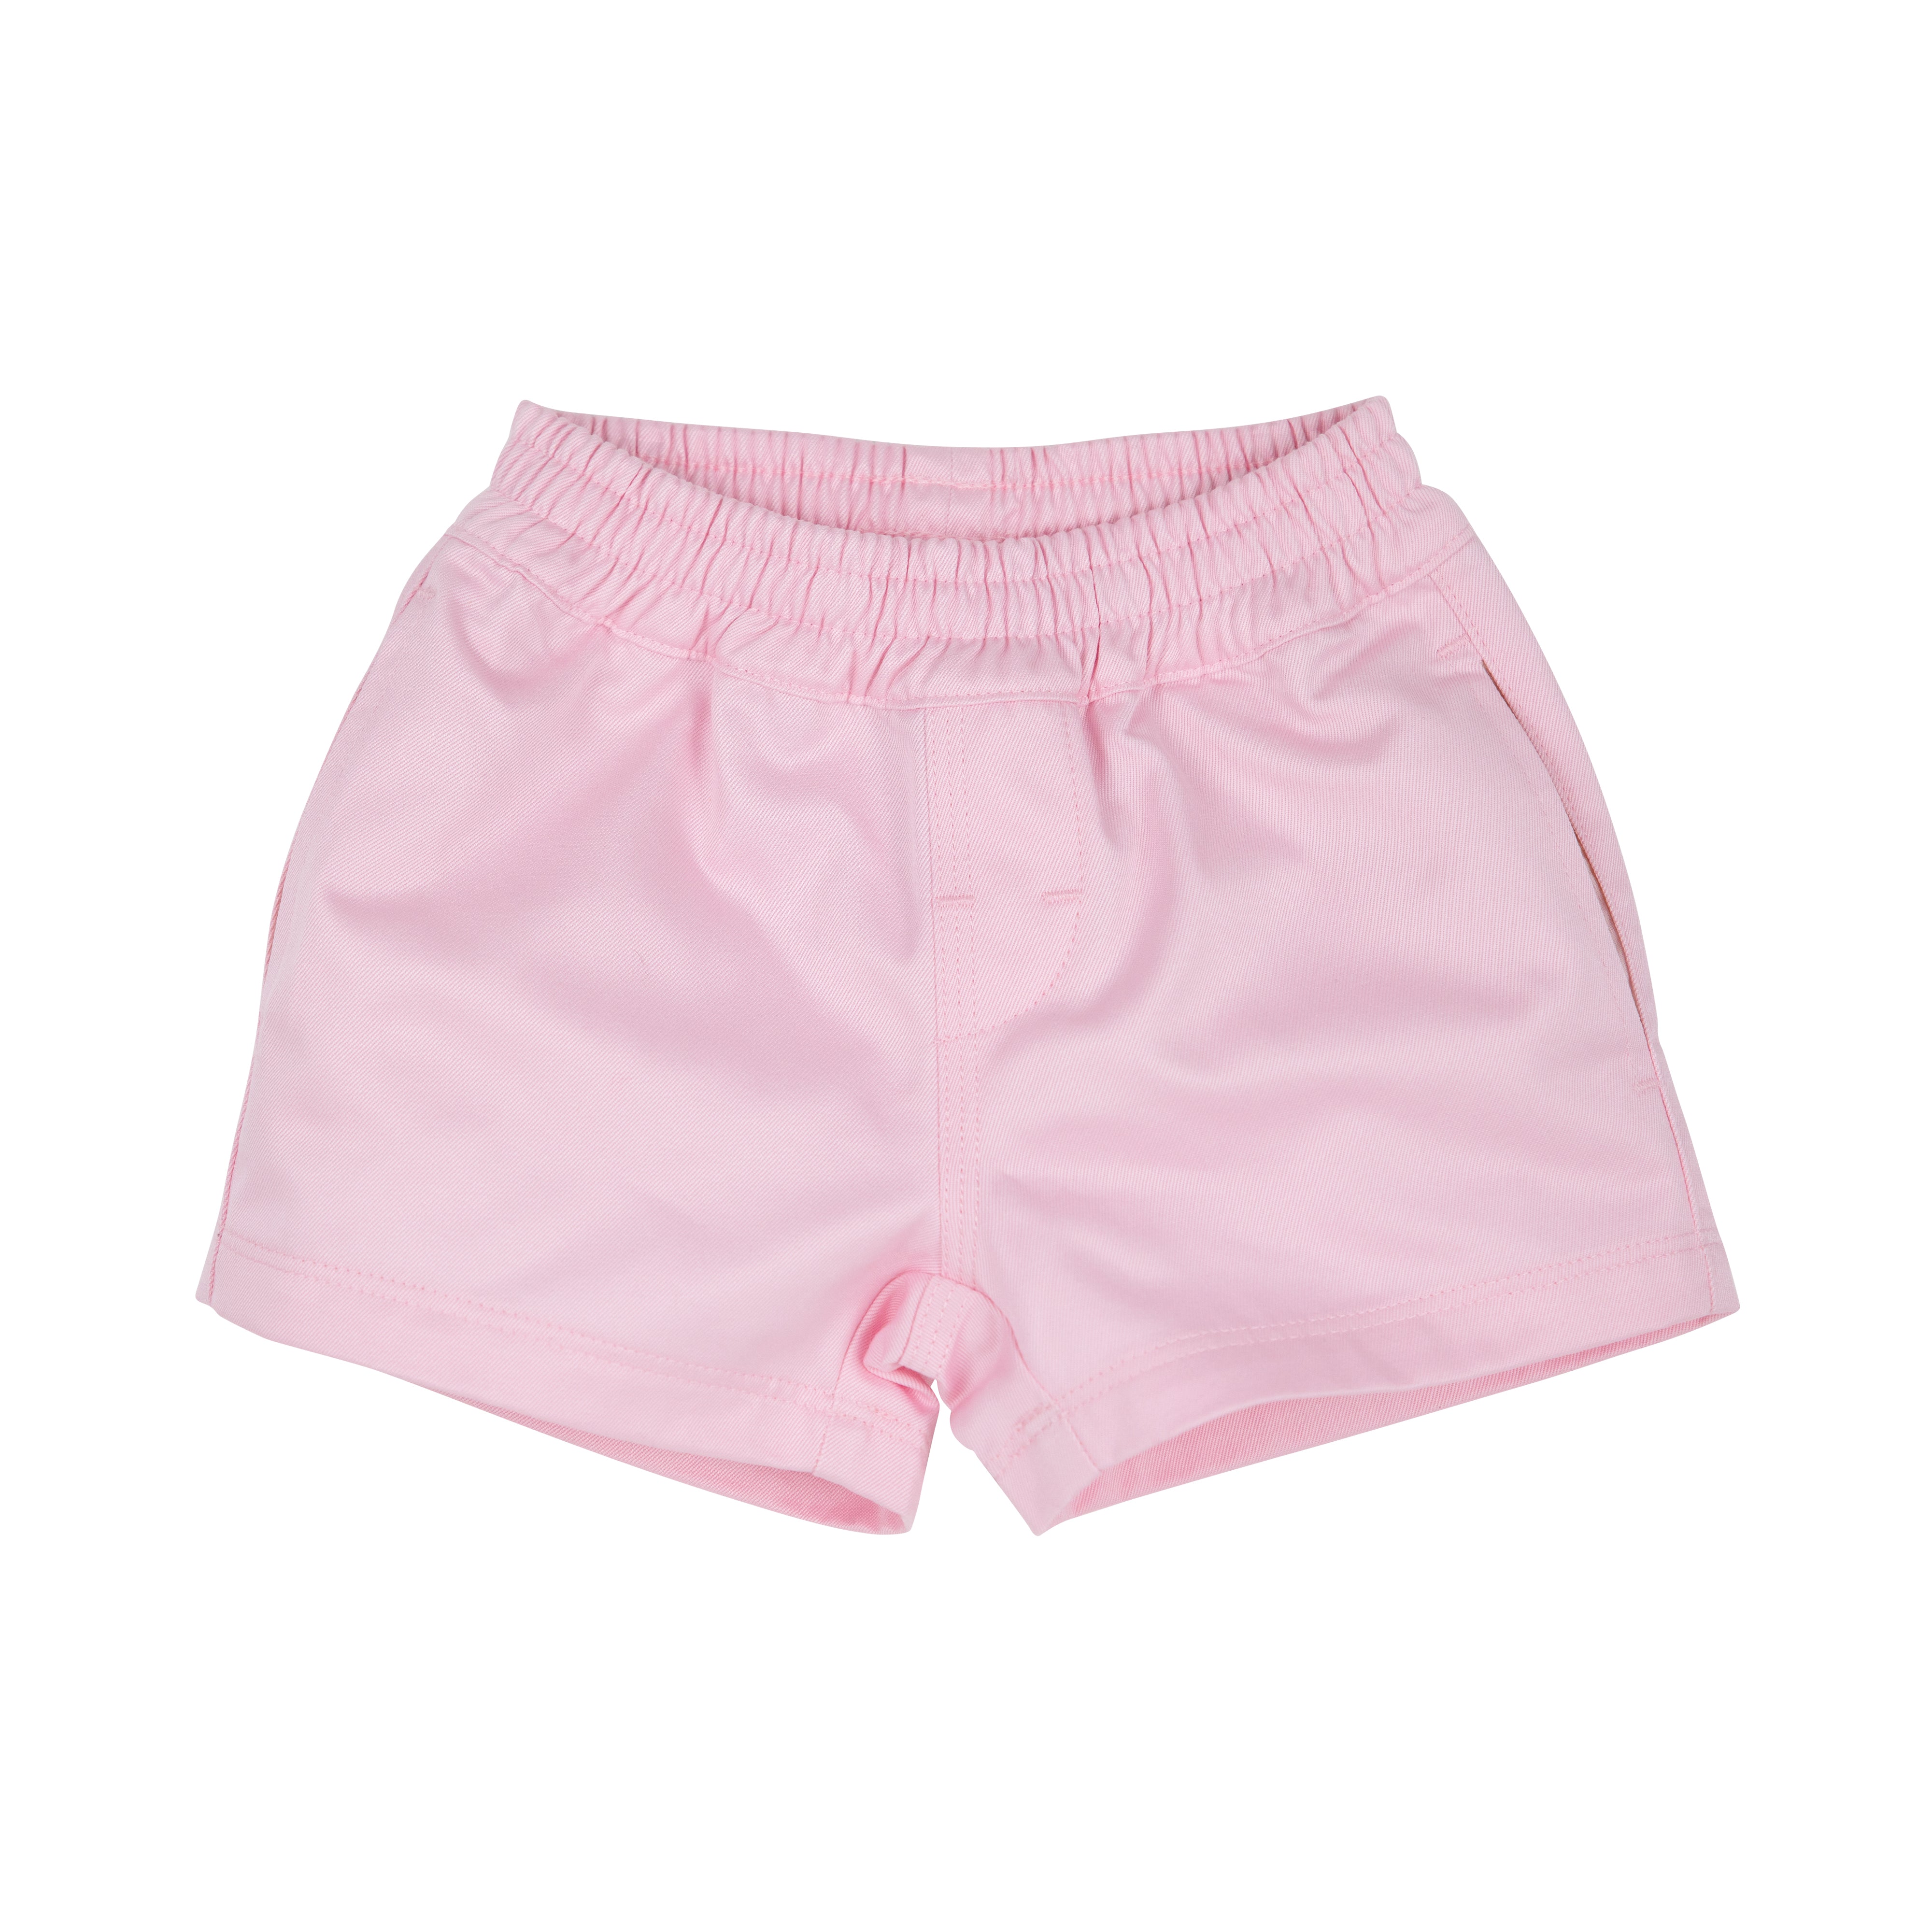 Sheffield Shorts - Palm Beach Pink with Mandeville Mint Stork – The ...